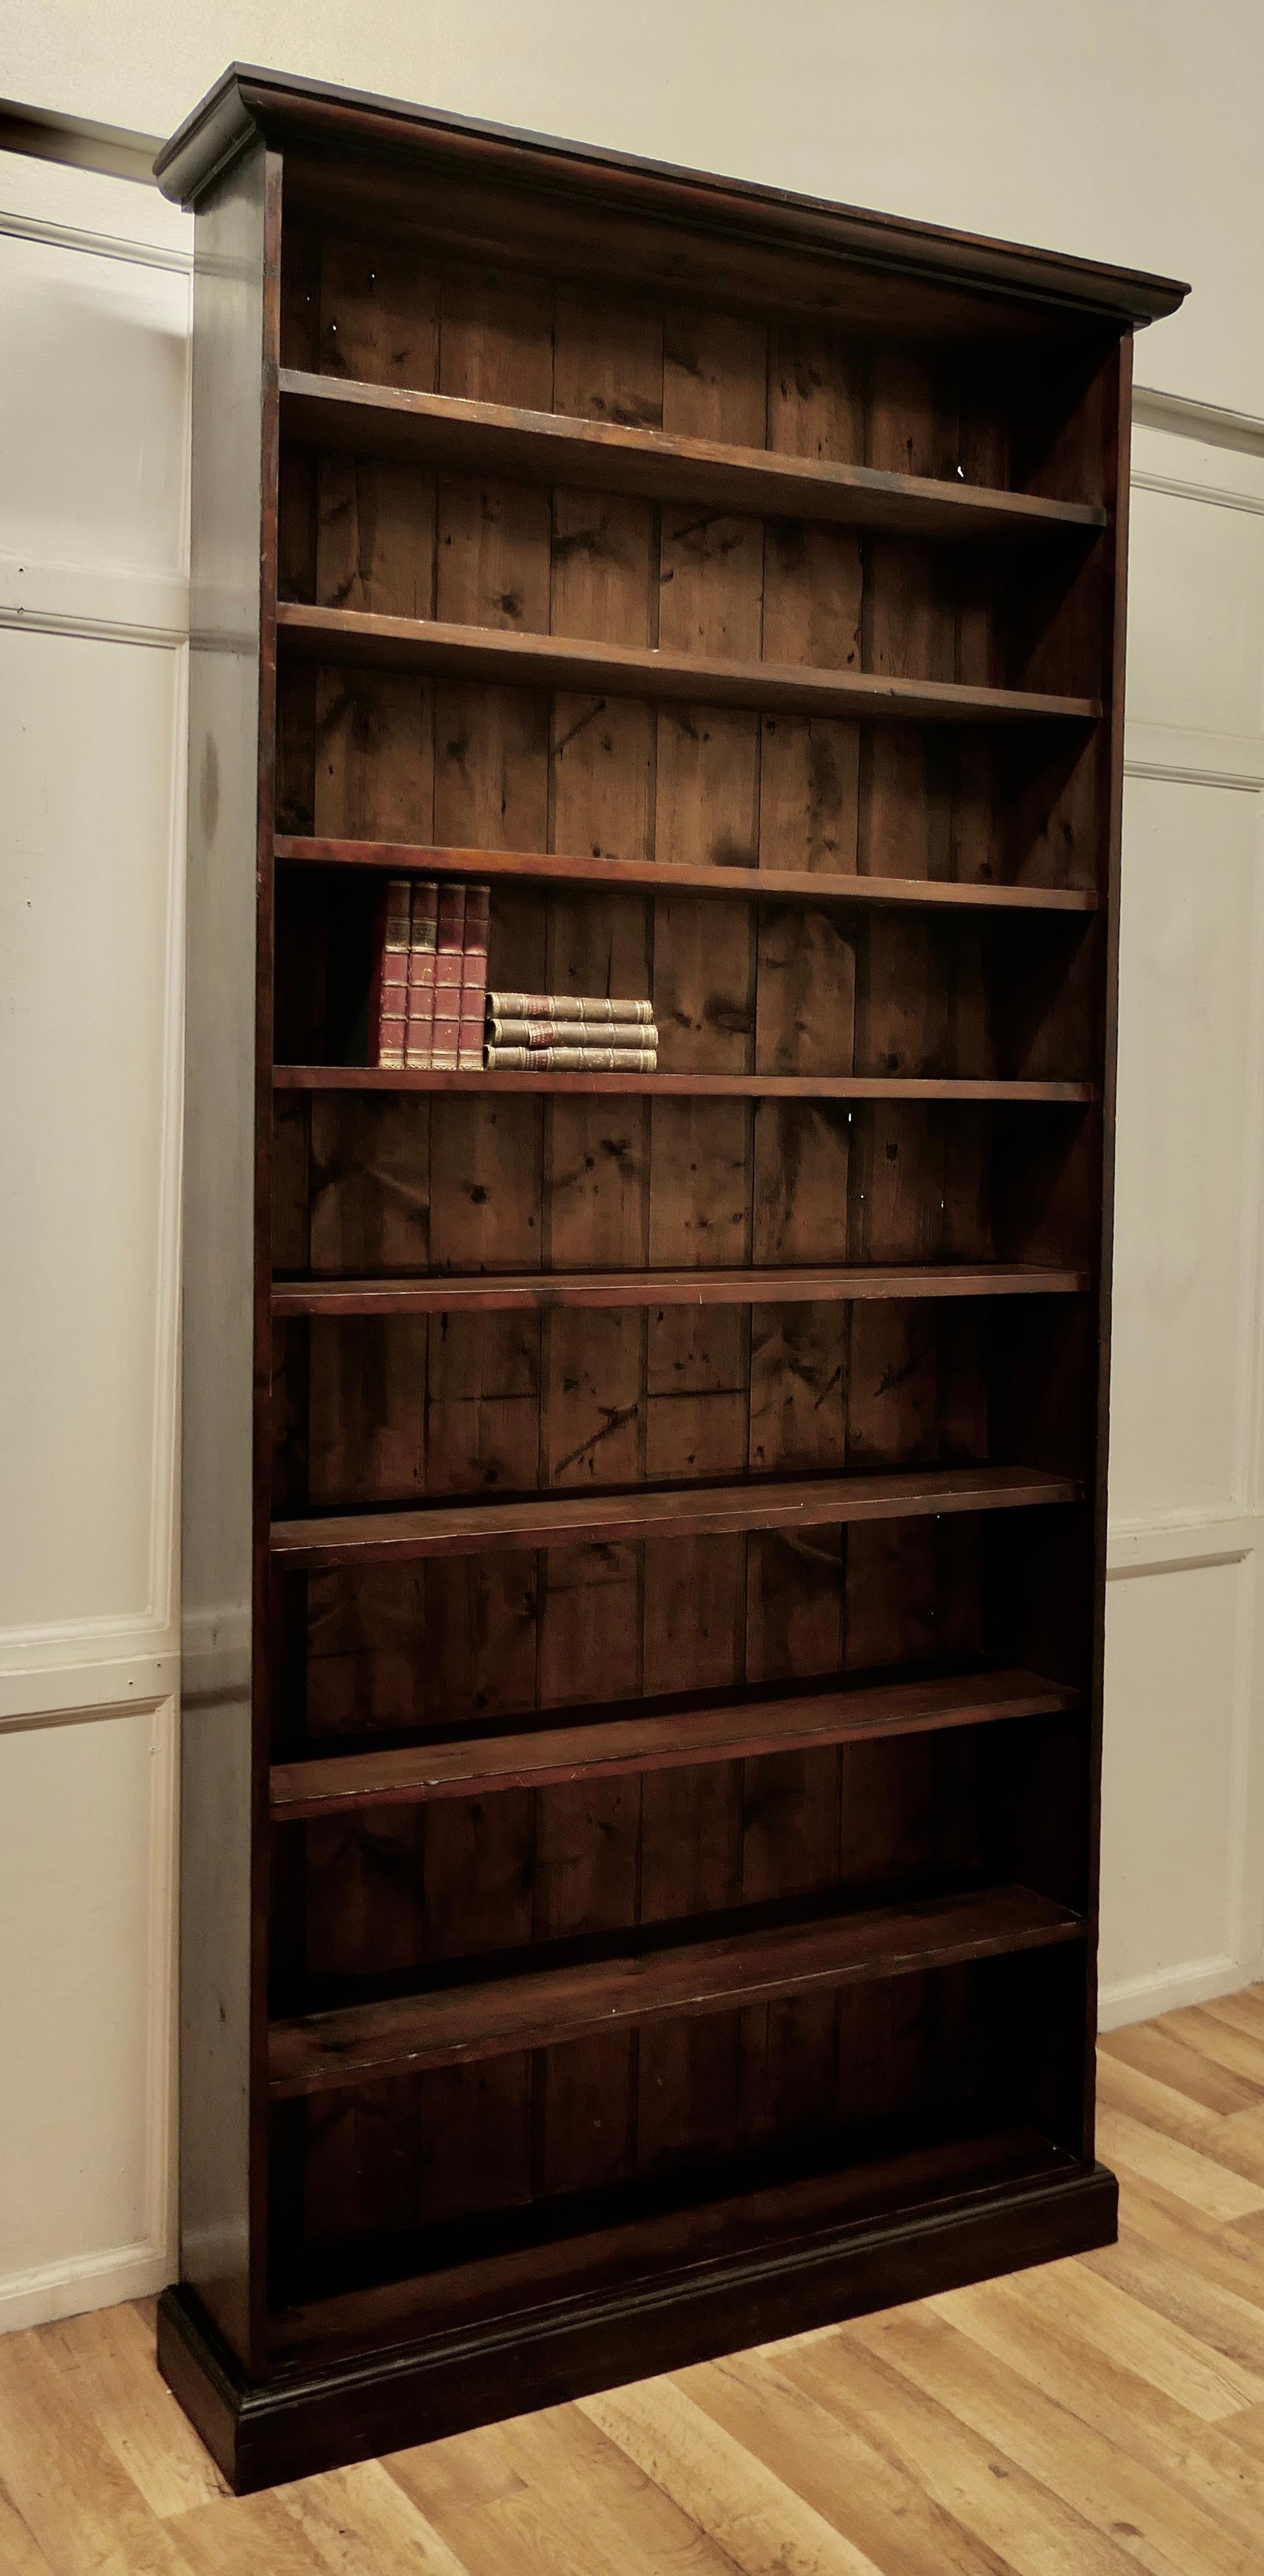 19th century very tall open book case, in dark pine

This is a classic timeless piece, the book case is hand made in thick pine, with a planked back, it has 9 open shelves, it has a small plinth and a neat cornice
All in all very good